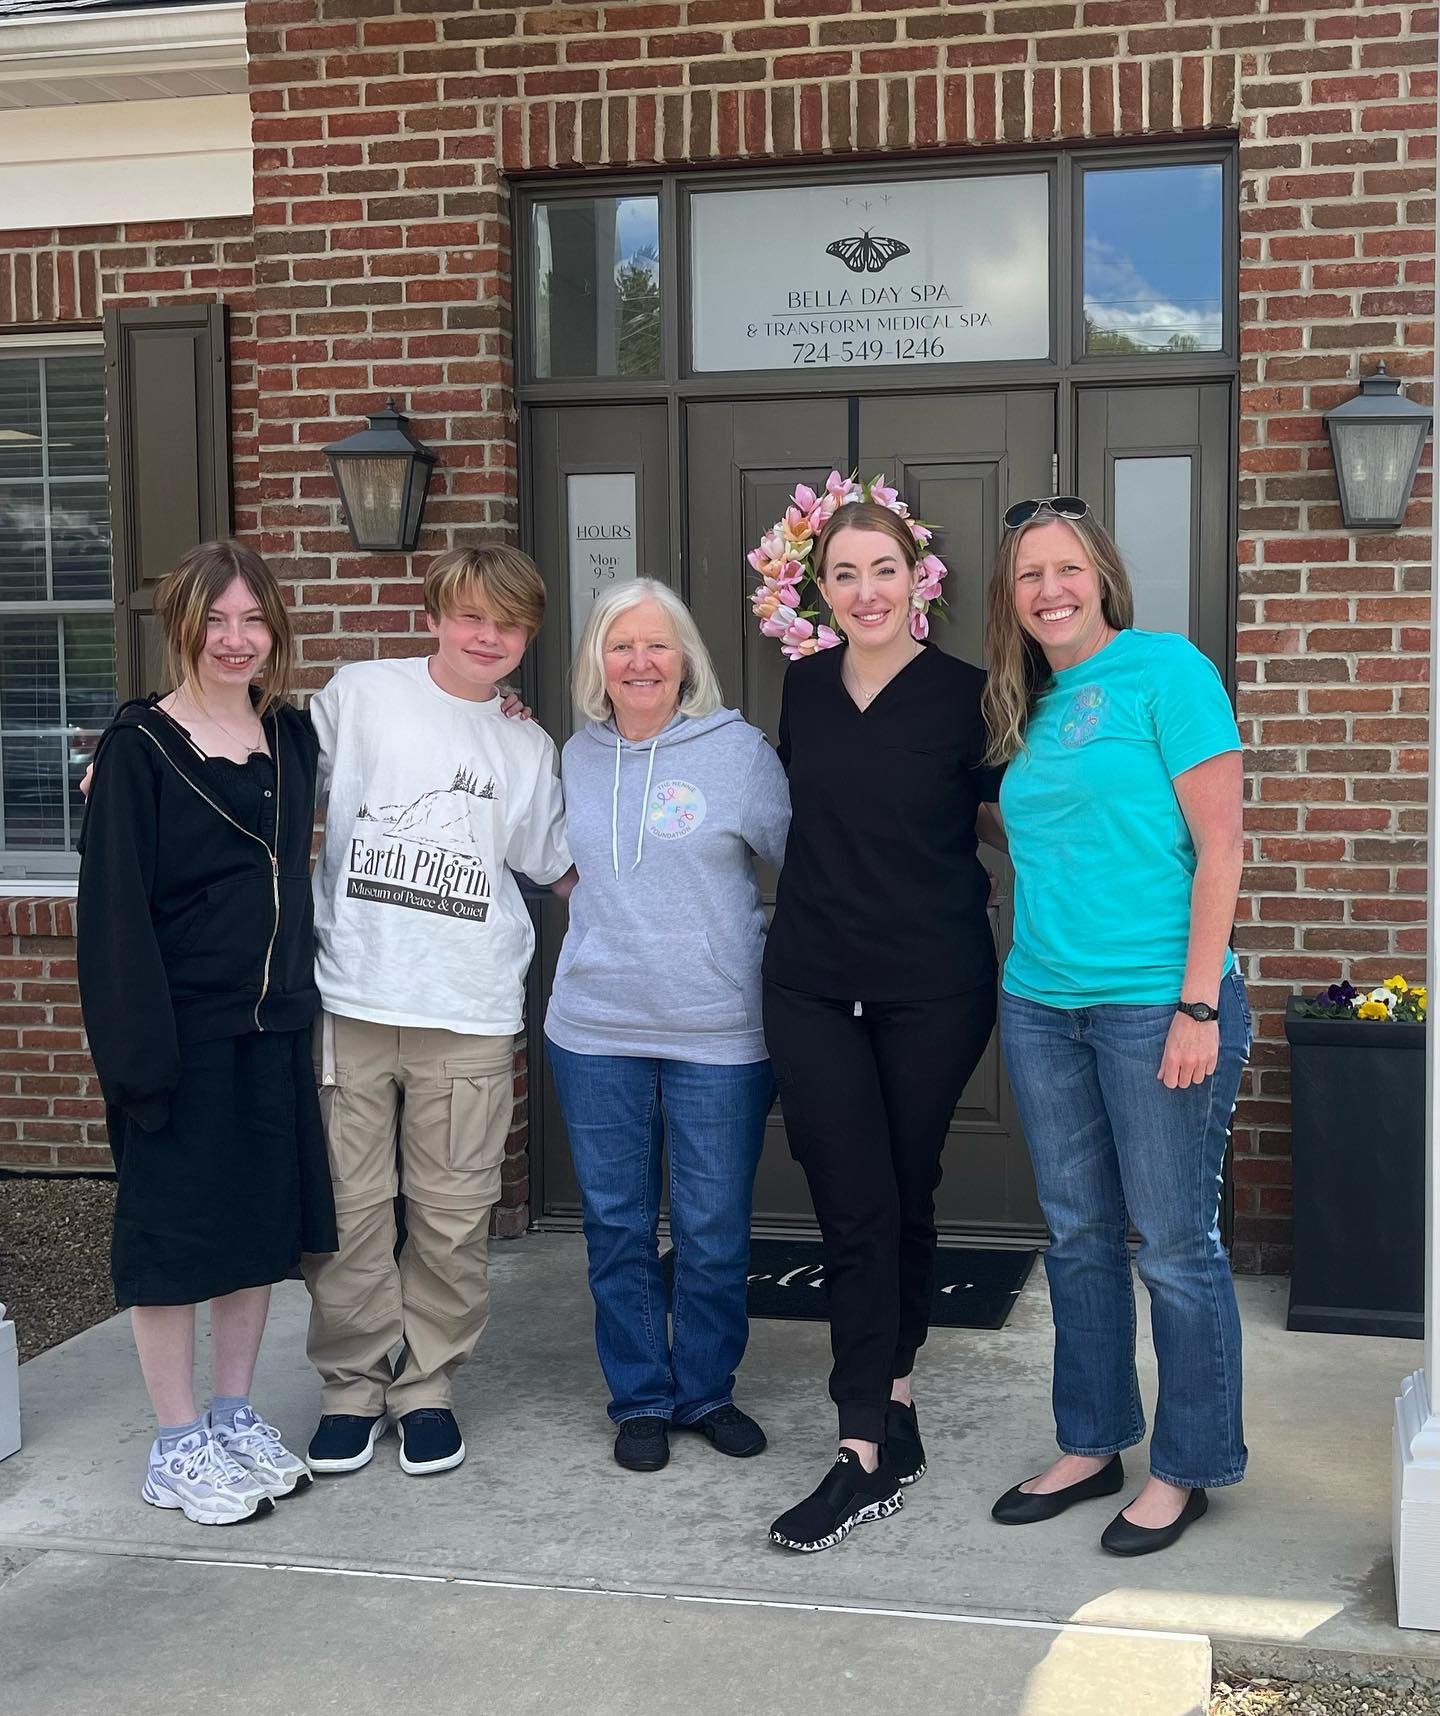 Many thanks to the staff and customers of Bella Spa and Beauty for their generous donation to The Nennie Foundation!  Jenn looked forward to her frequent visits to Bella and loved the people as well as the treatments. 

Representatives of The Nennie 